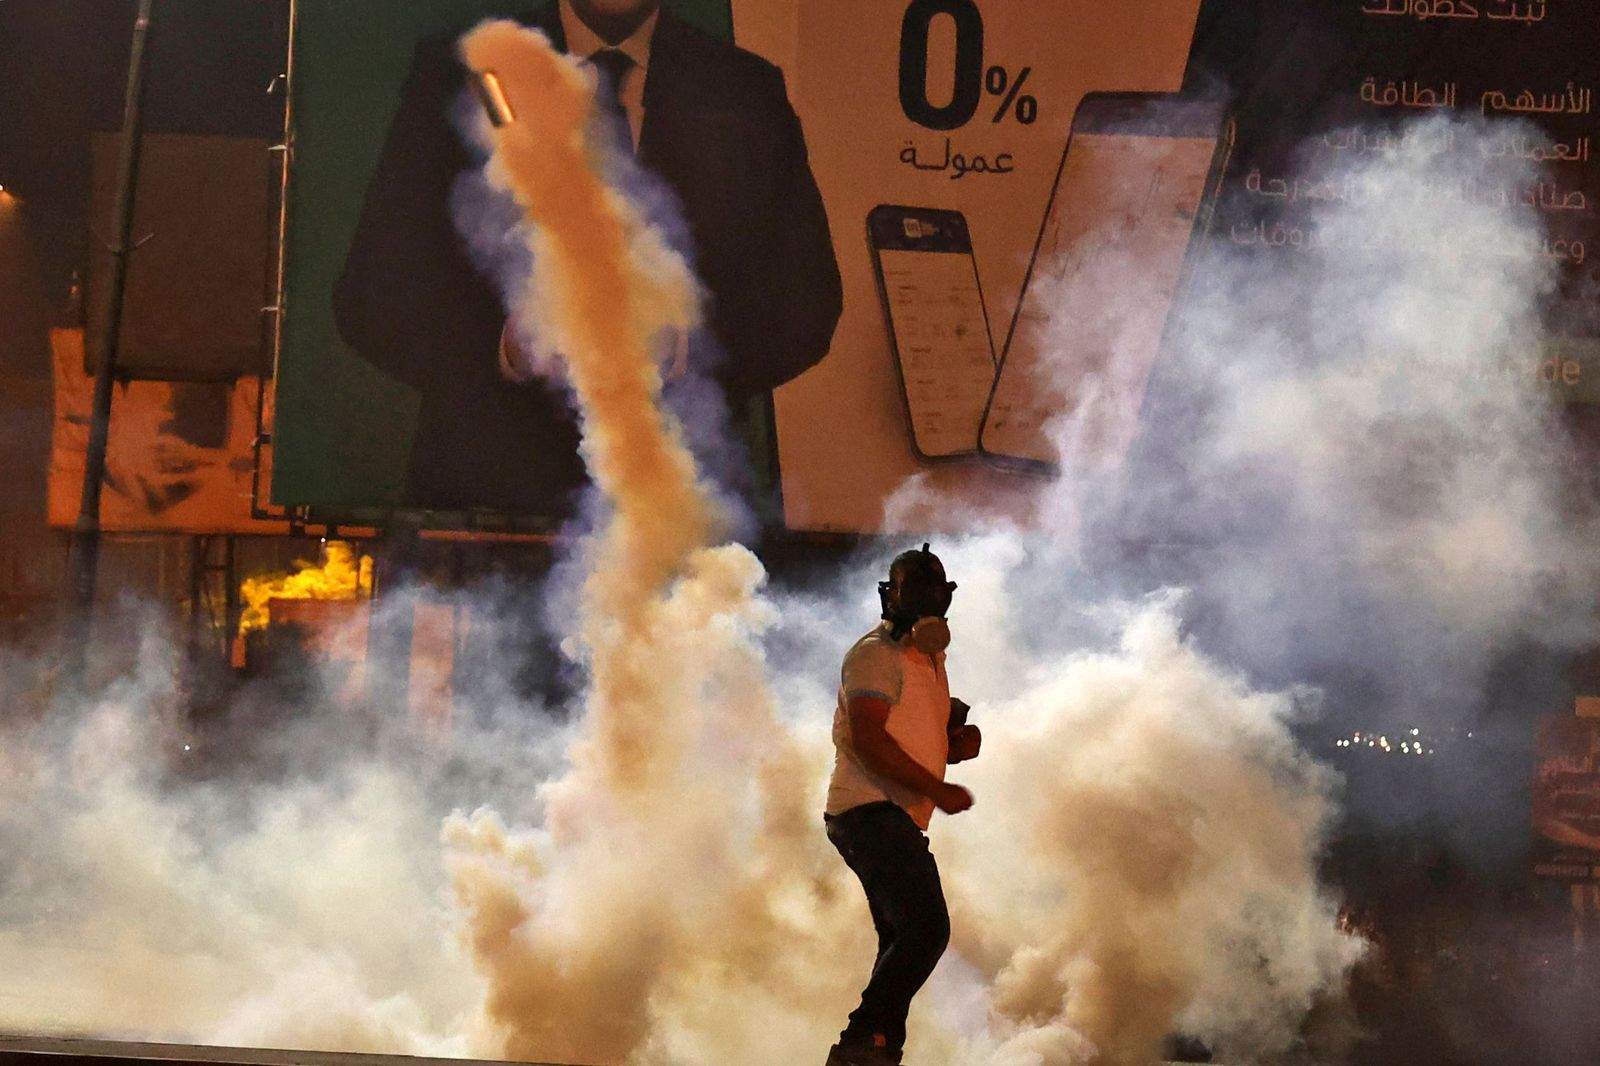 A Palestinian protester stands amid tear gas fired by Israeli security forces at the Hawara checkpoint, south of Nablus city, in the occupied West Bank on May 8, 2021. (Photo by JAAFAR ASHTIYEH / AFP) - AFP